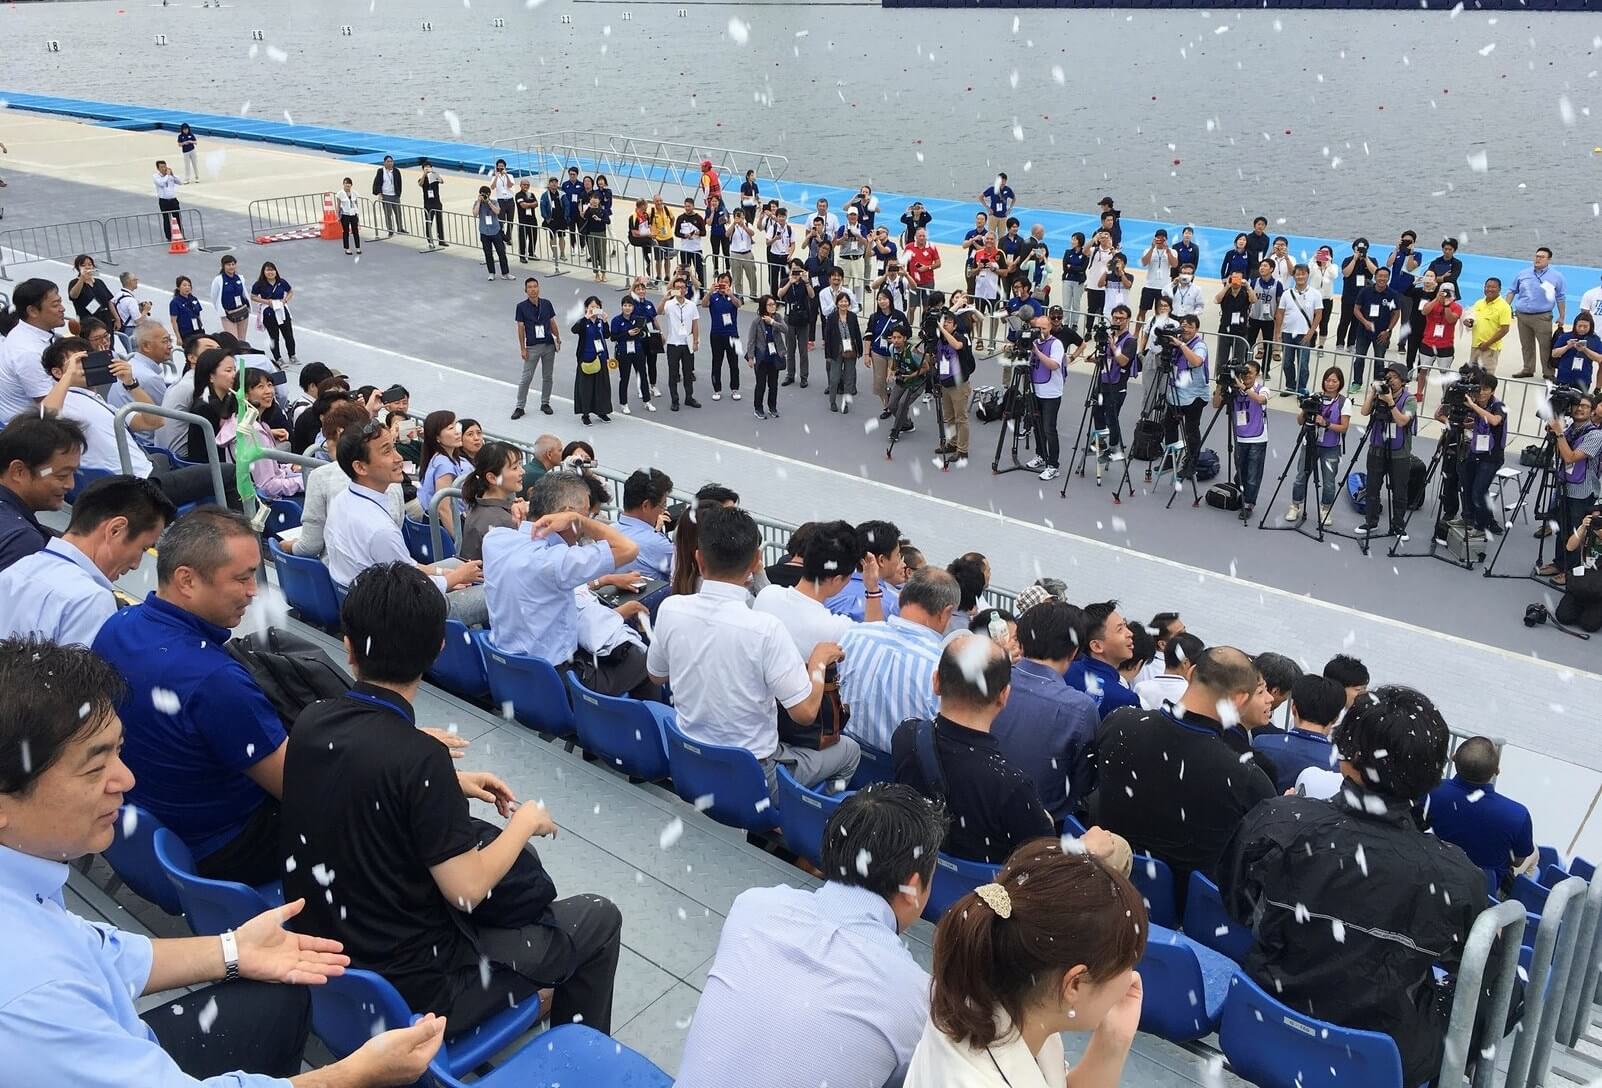 Tokyo Olympic games organizers could use fake snow to keep crowds cool